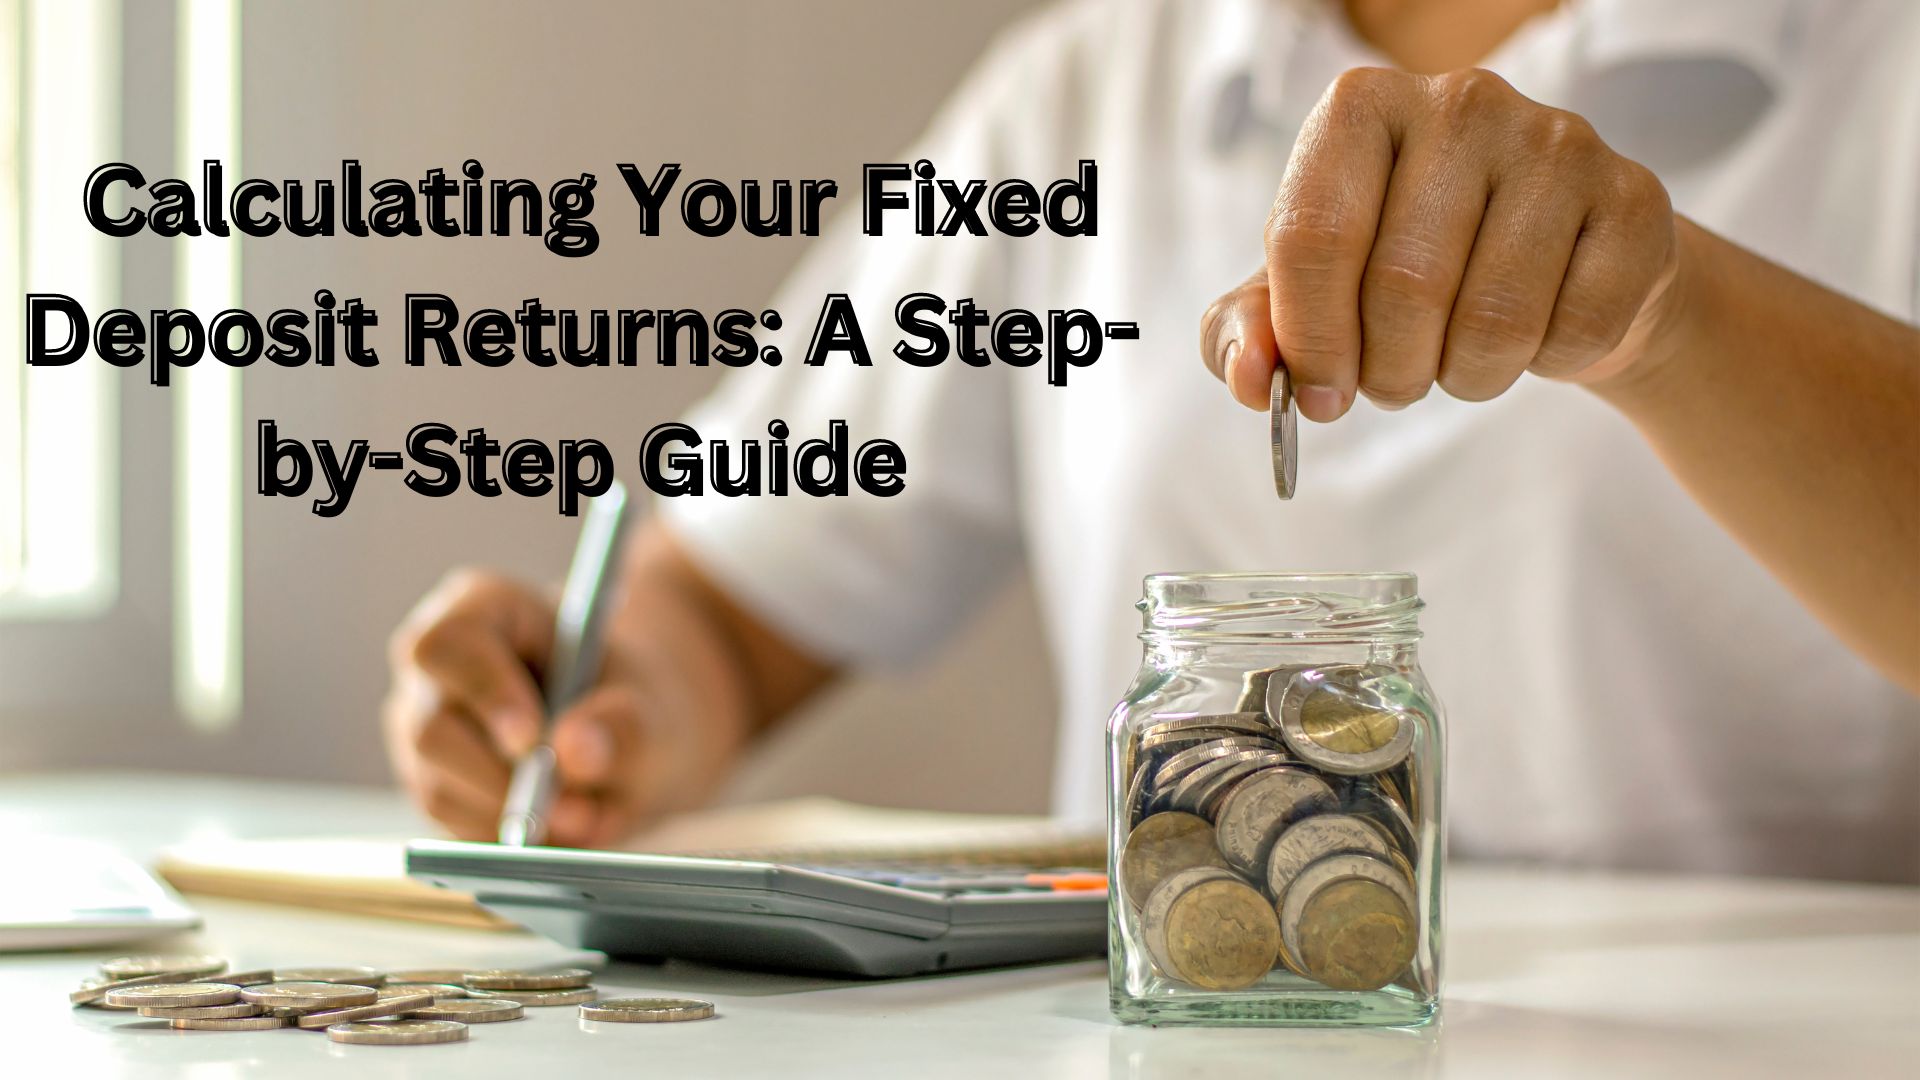 Calculating Your Fixed Deposit Returns: A Step-by-Step Guide